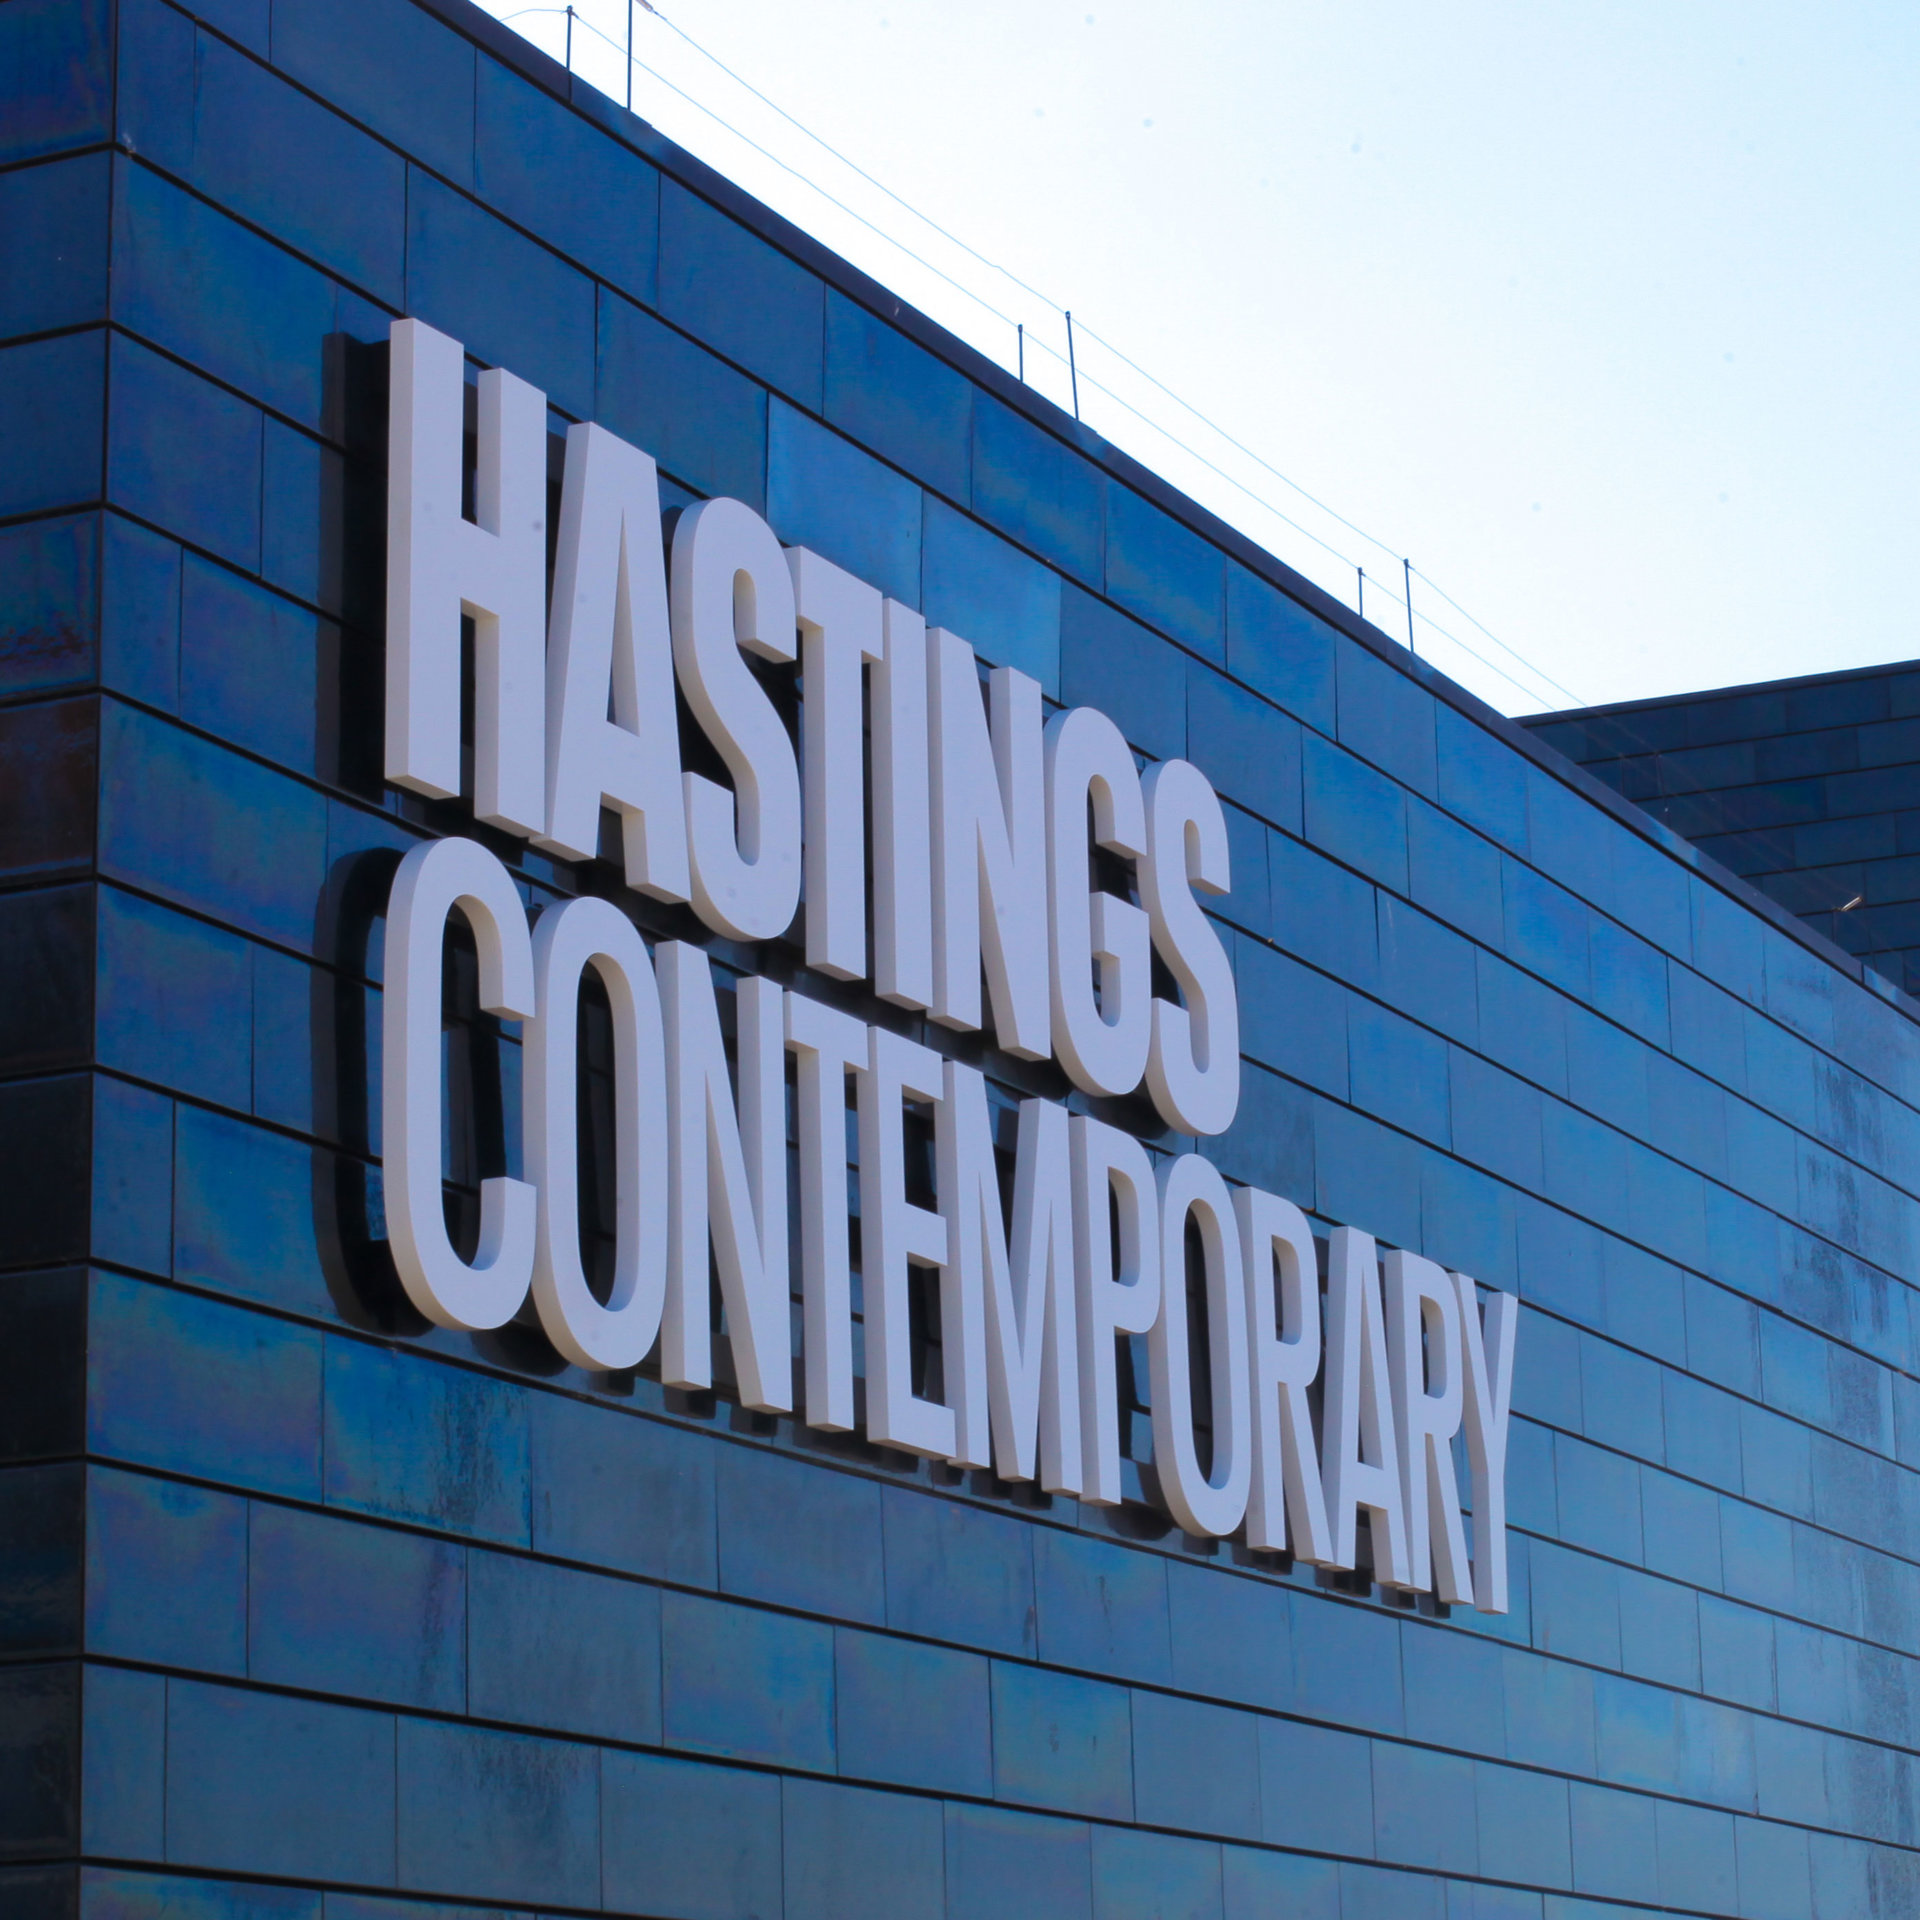 Hastings Contemporary